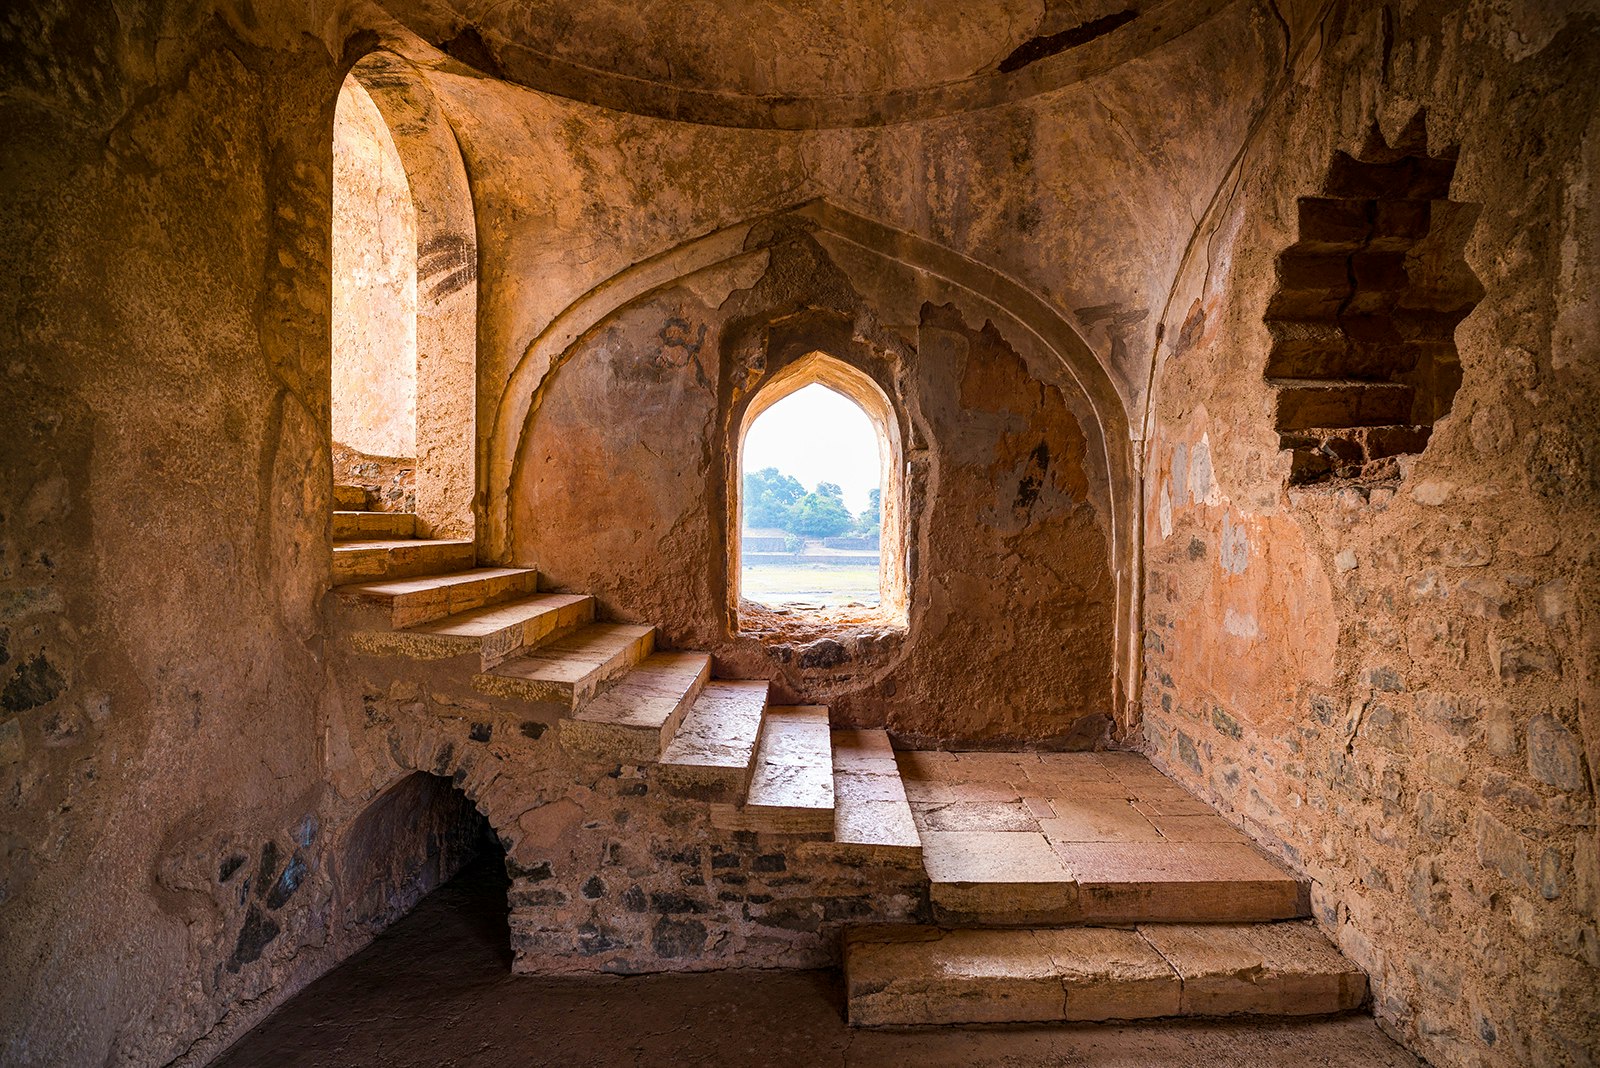 The interior of Mandu's ruins is characterized by arched doorways, arched windows and curved ceilings. Madhya Pradesh, India.